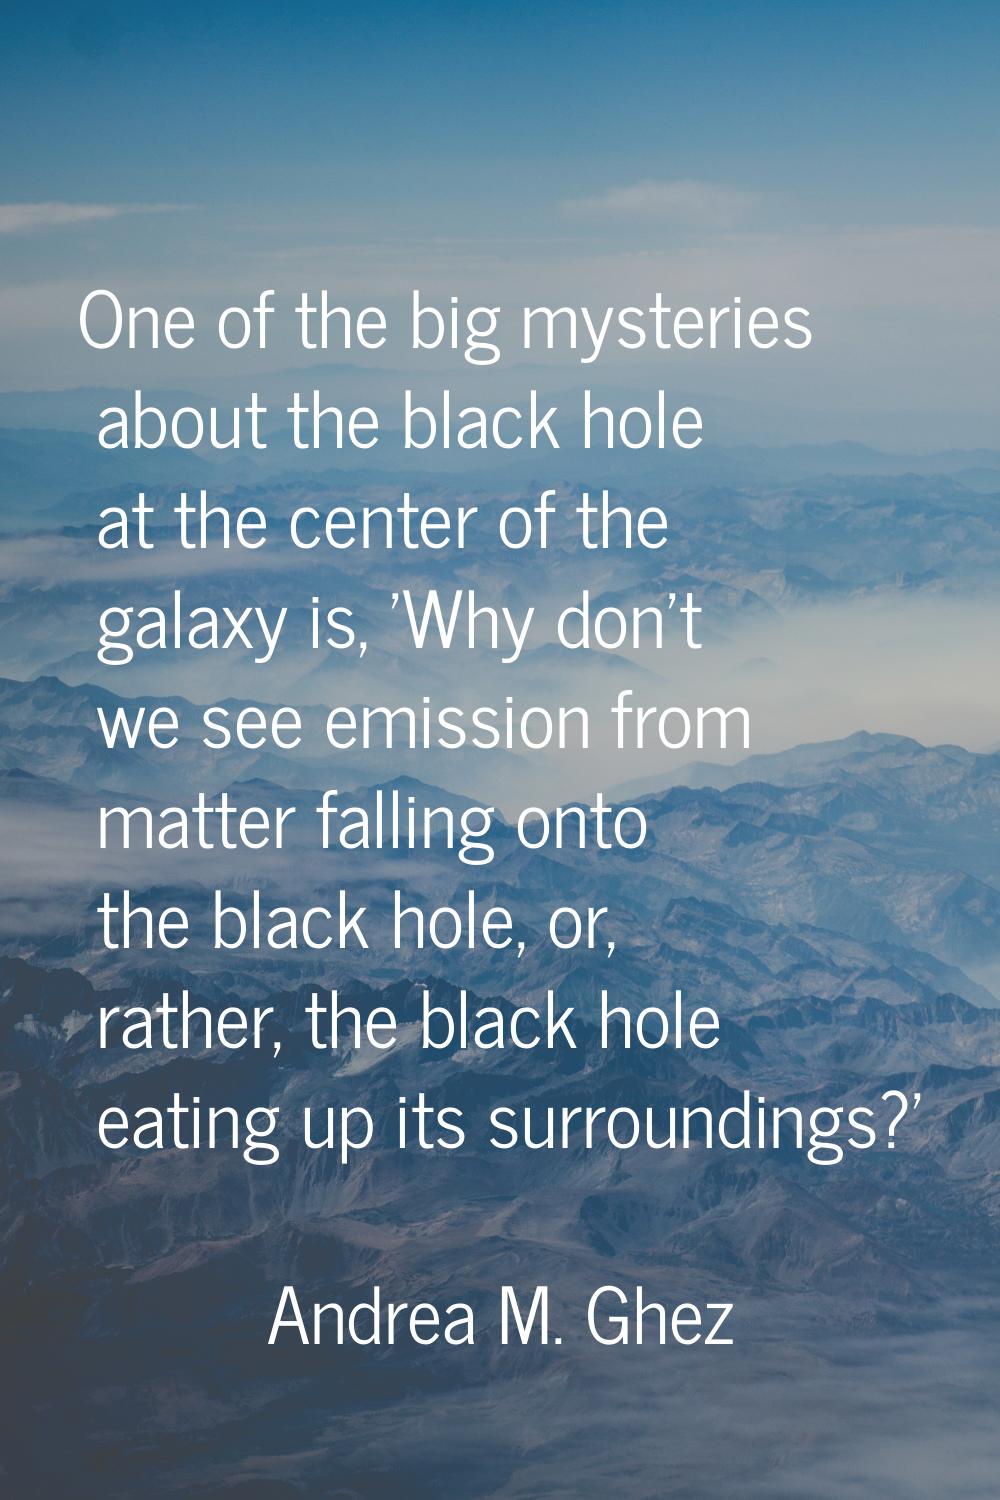 One of the big mysteries about the black hole at the center of the galaxy is, 'Why don't we see emi